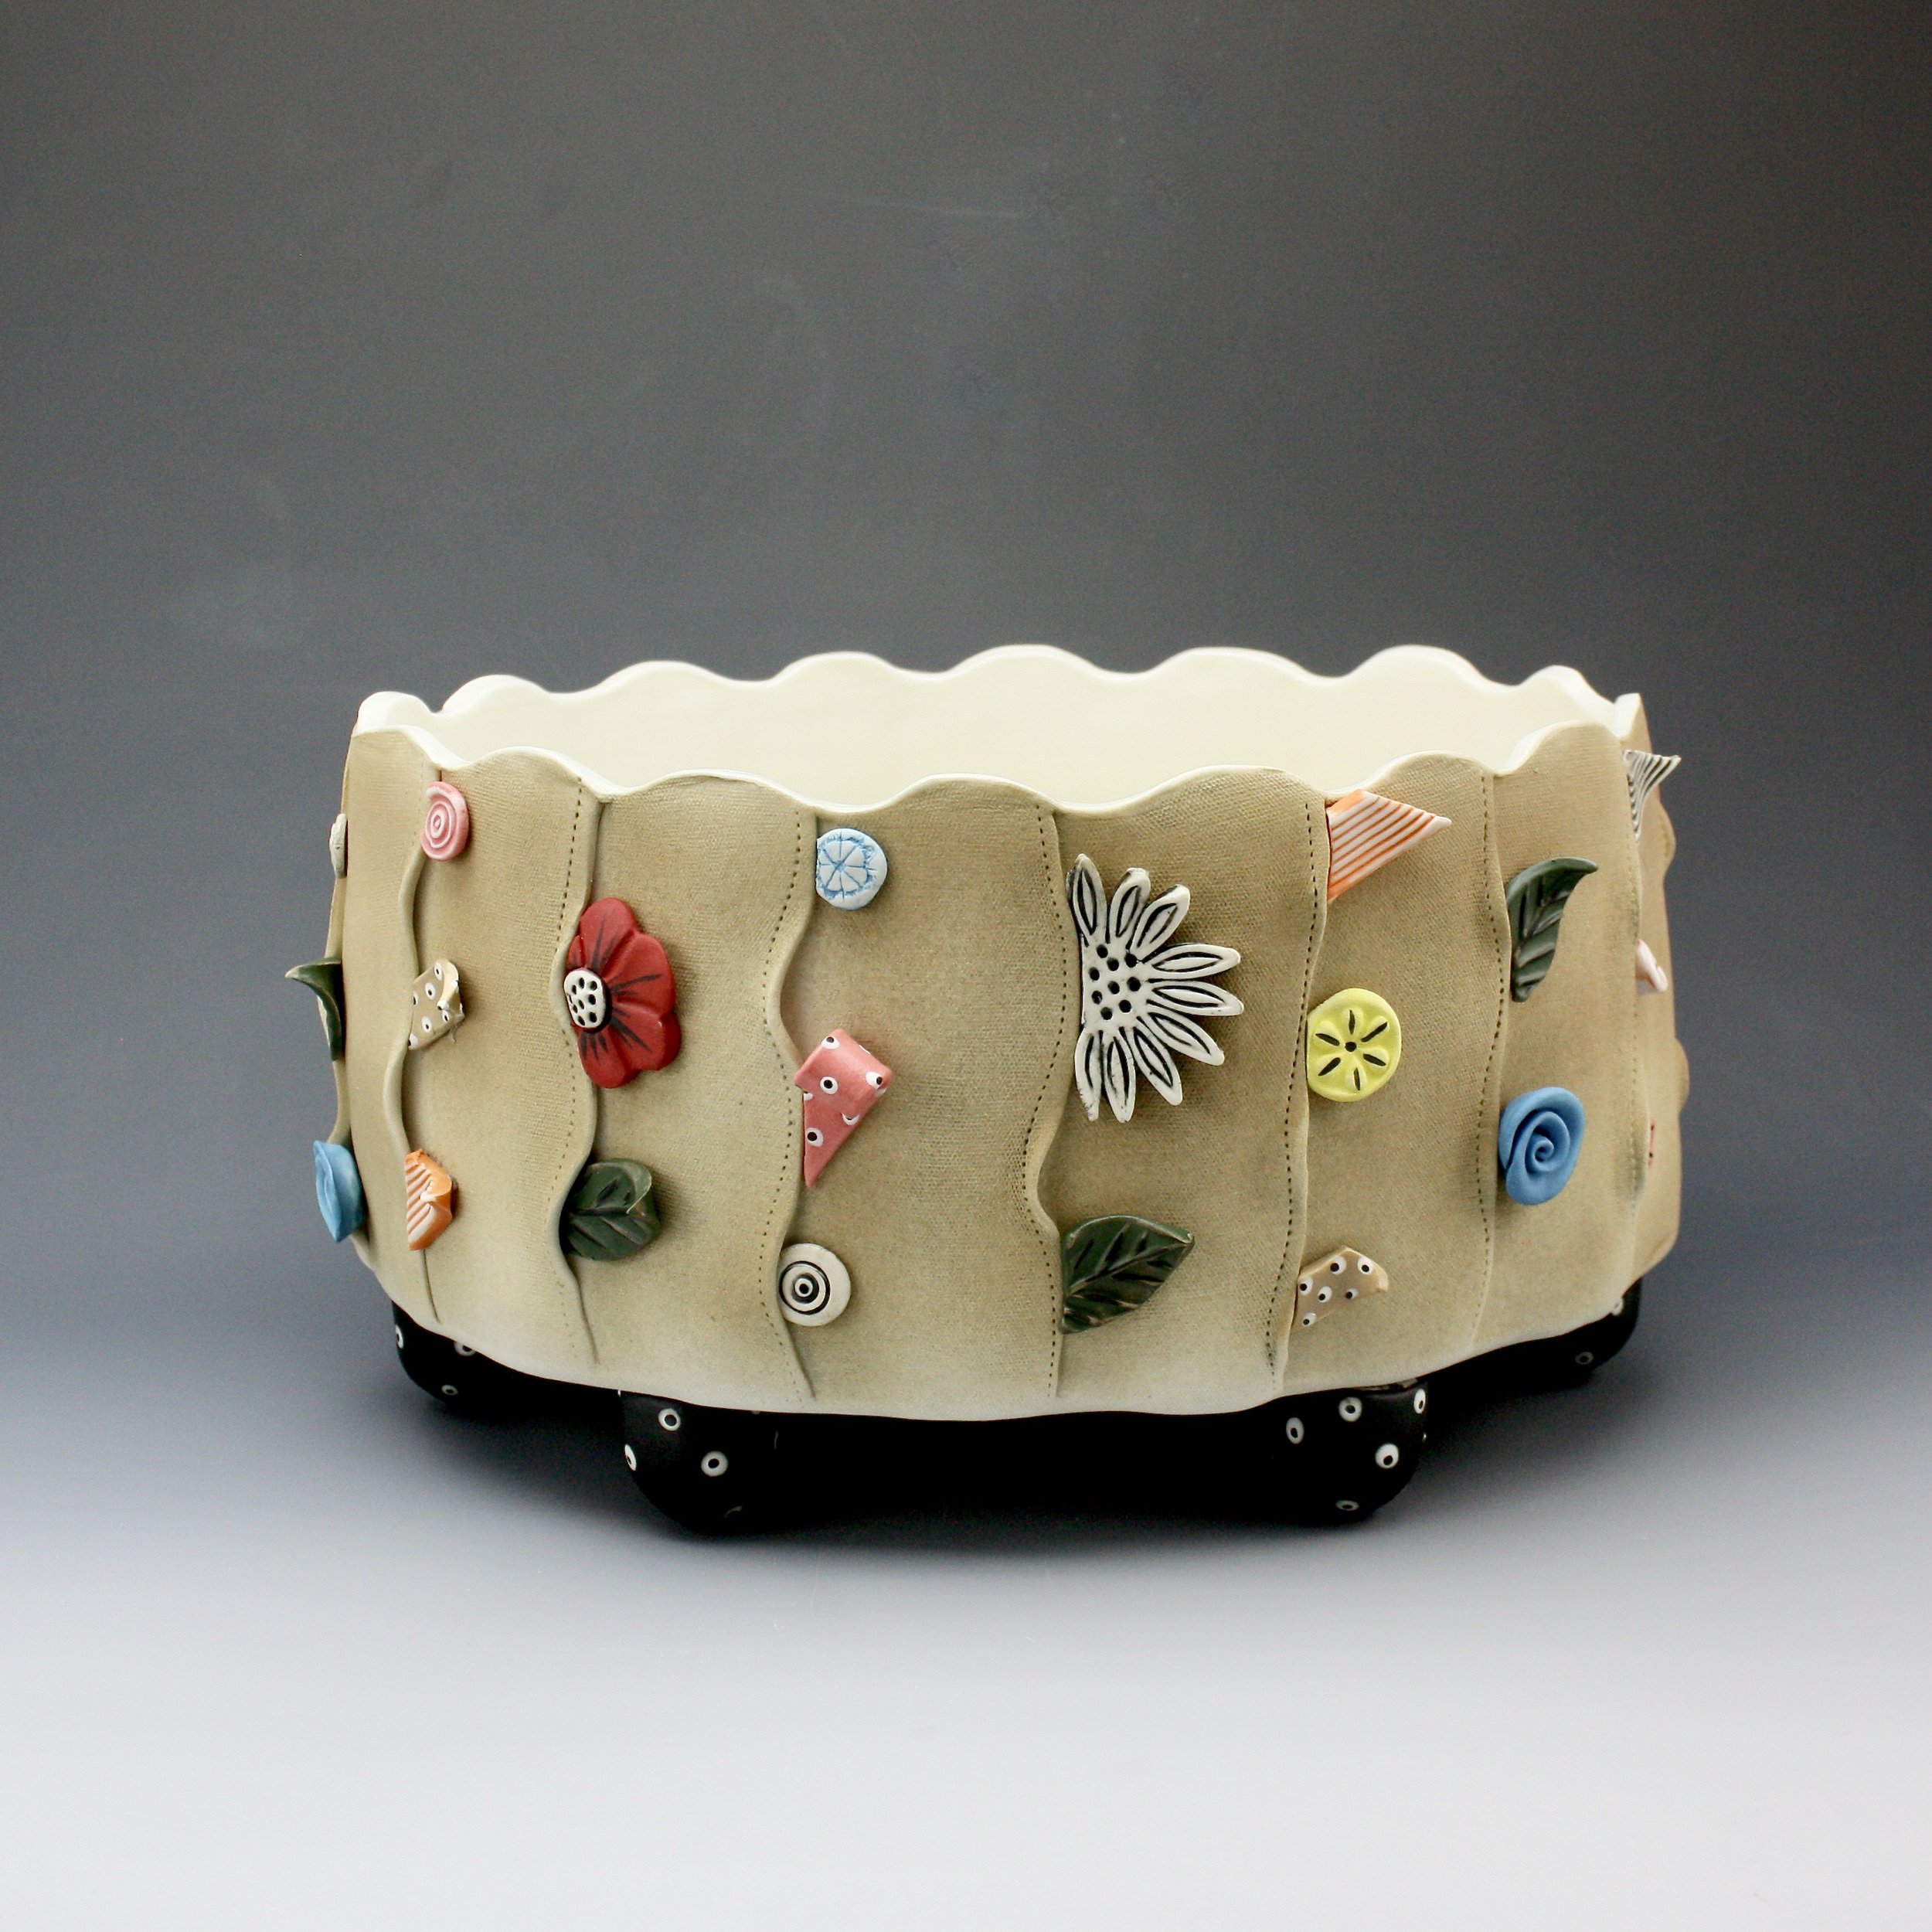 Accoutrements Vessel 6" high by Laura Peery